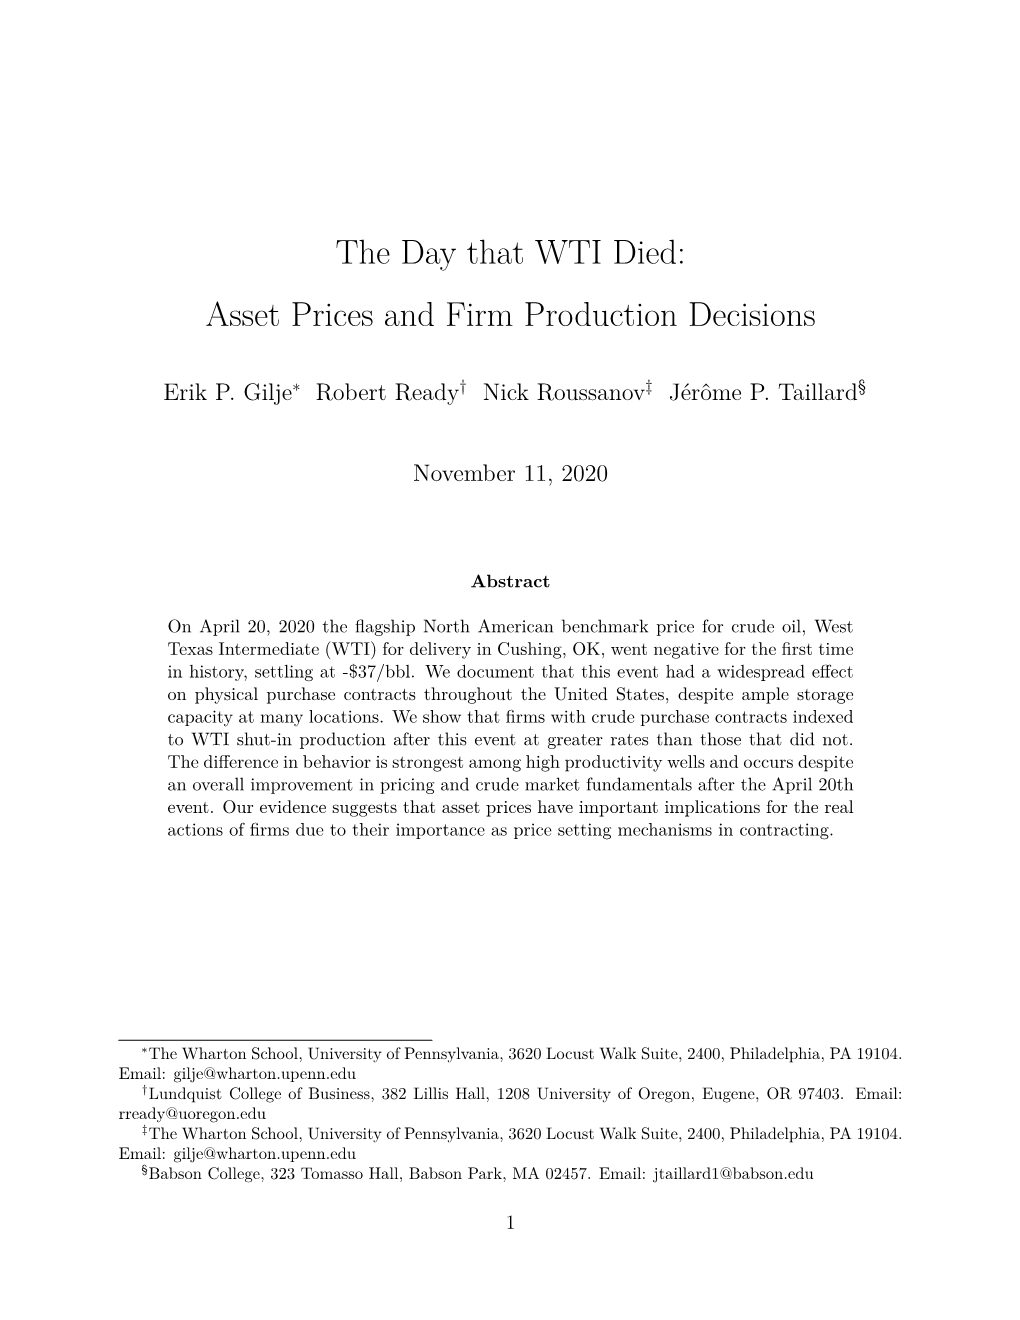 The Day That WTI Died: Asset Prices and Firm Production Decisions